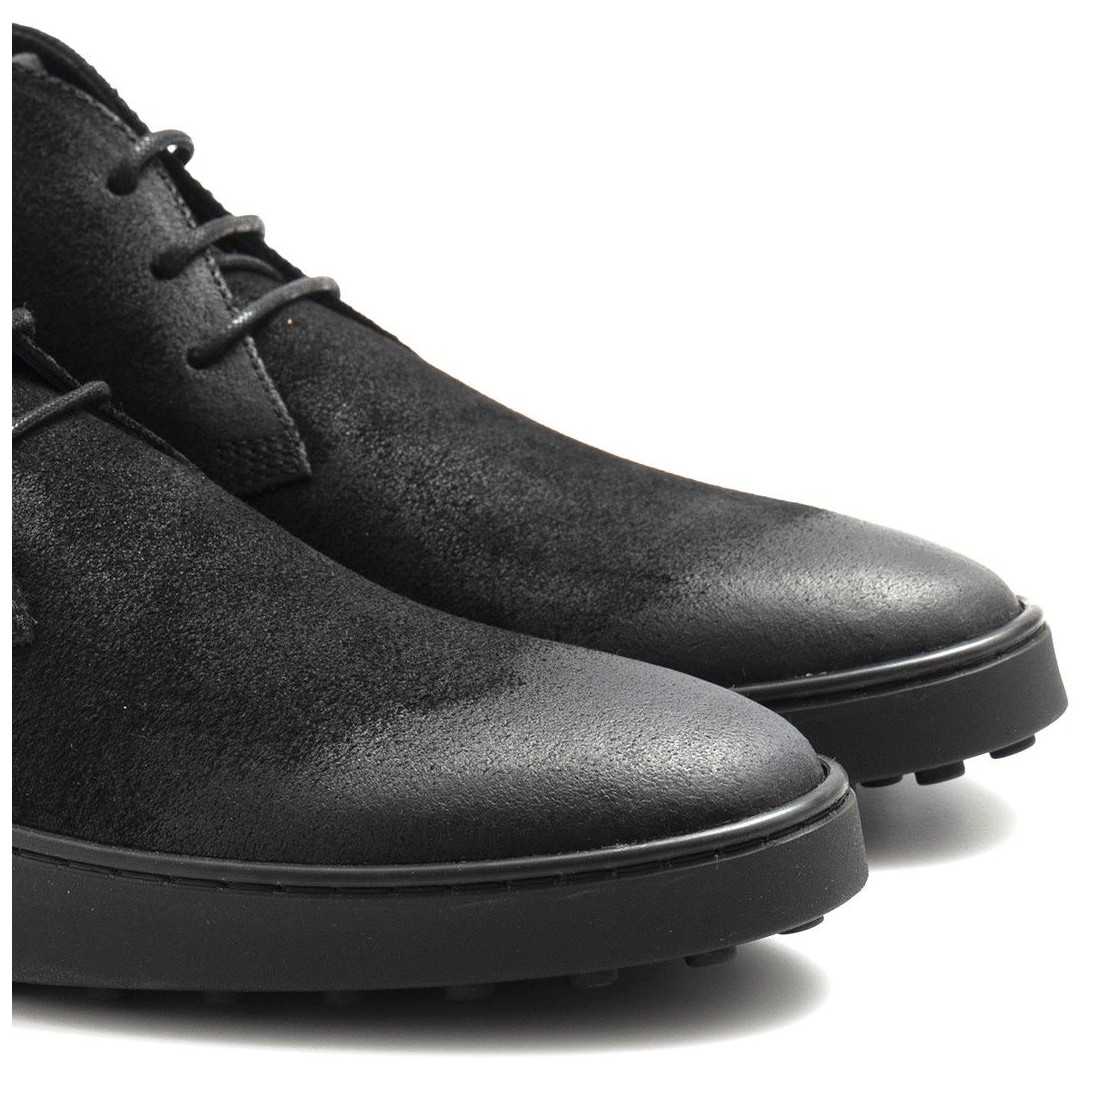 lace up desert boot in black waxed suede